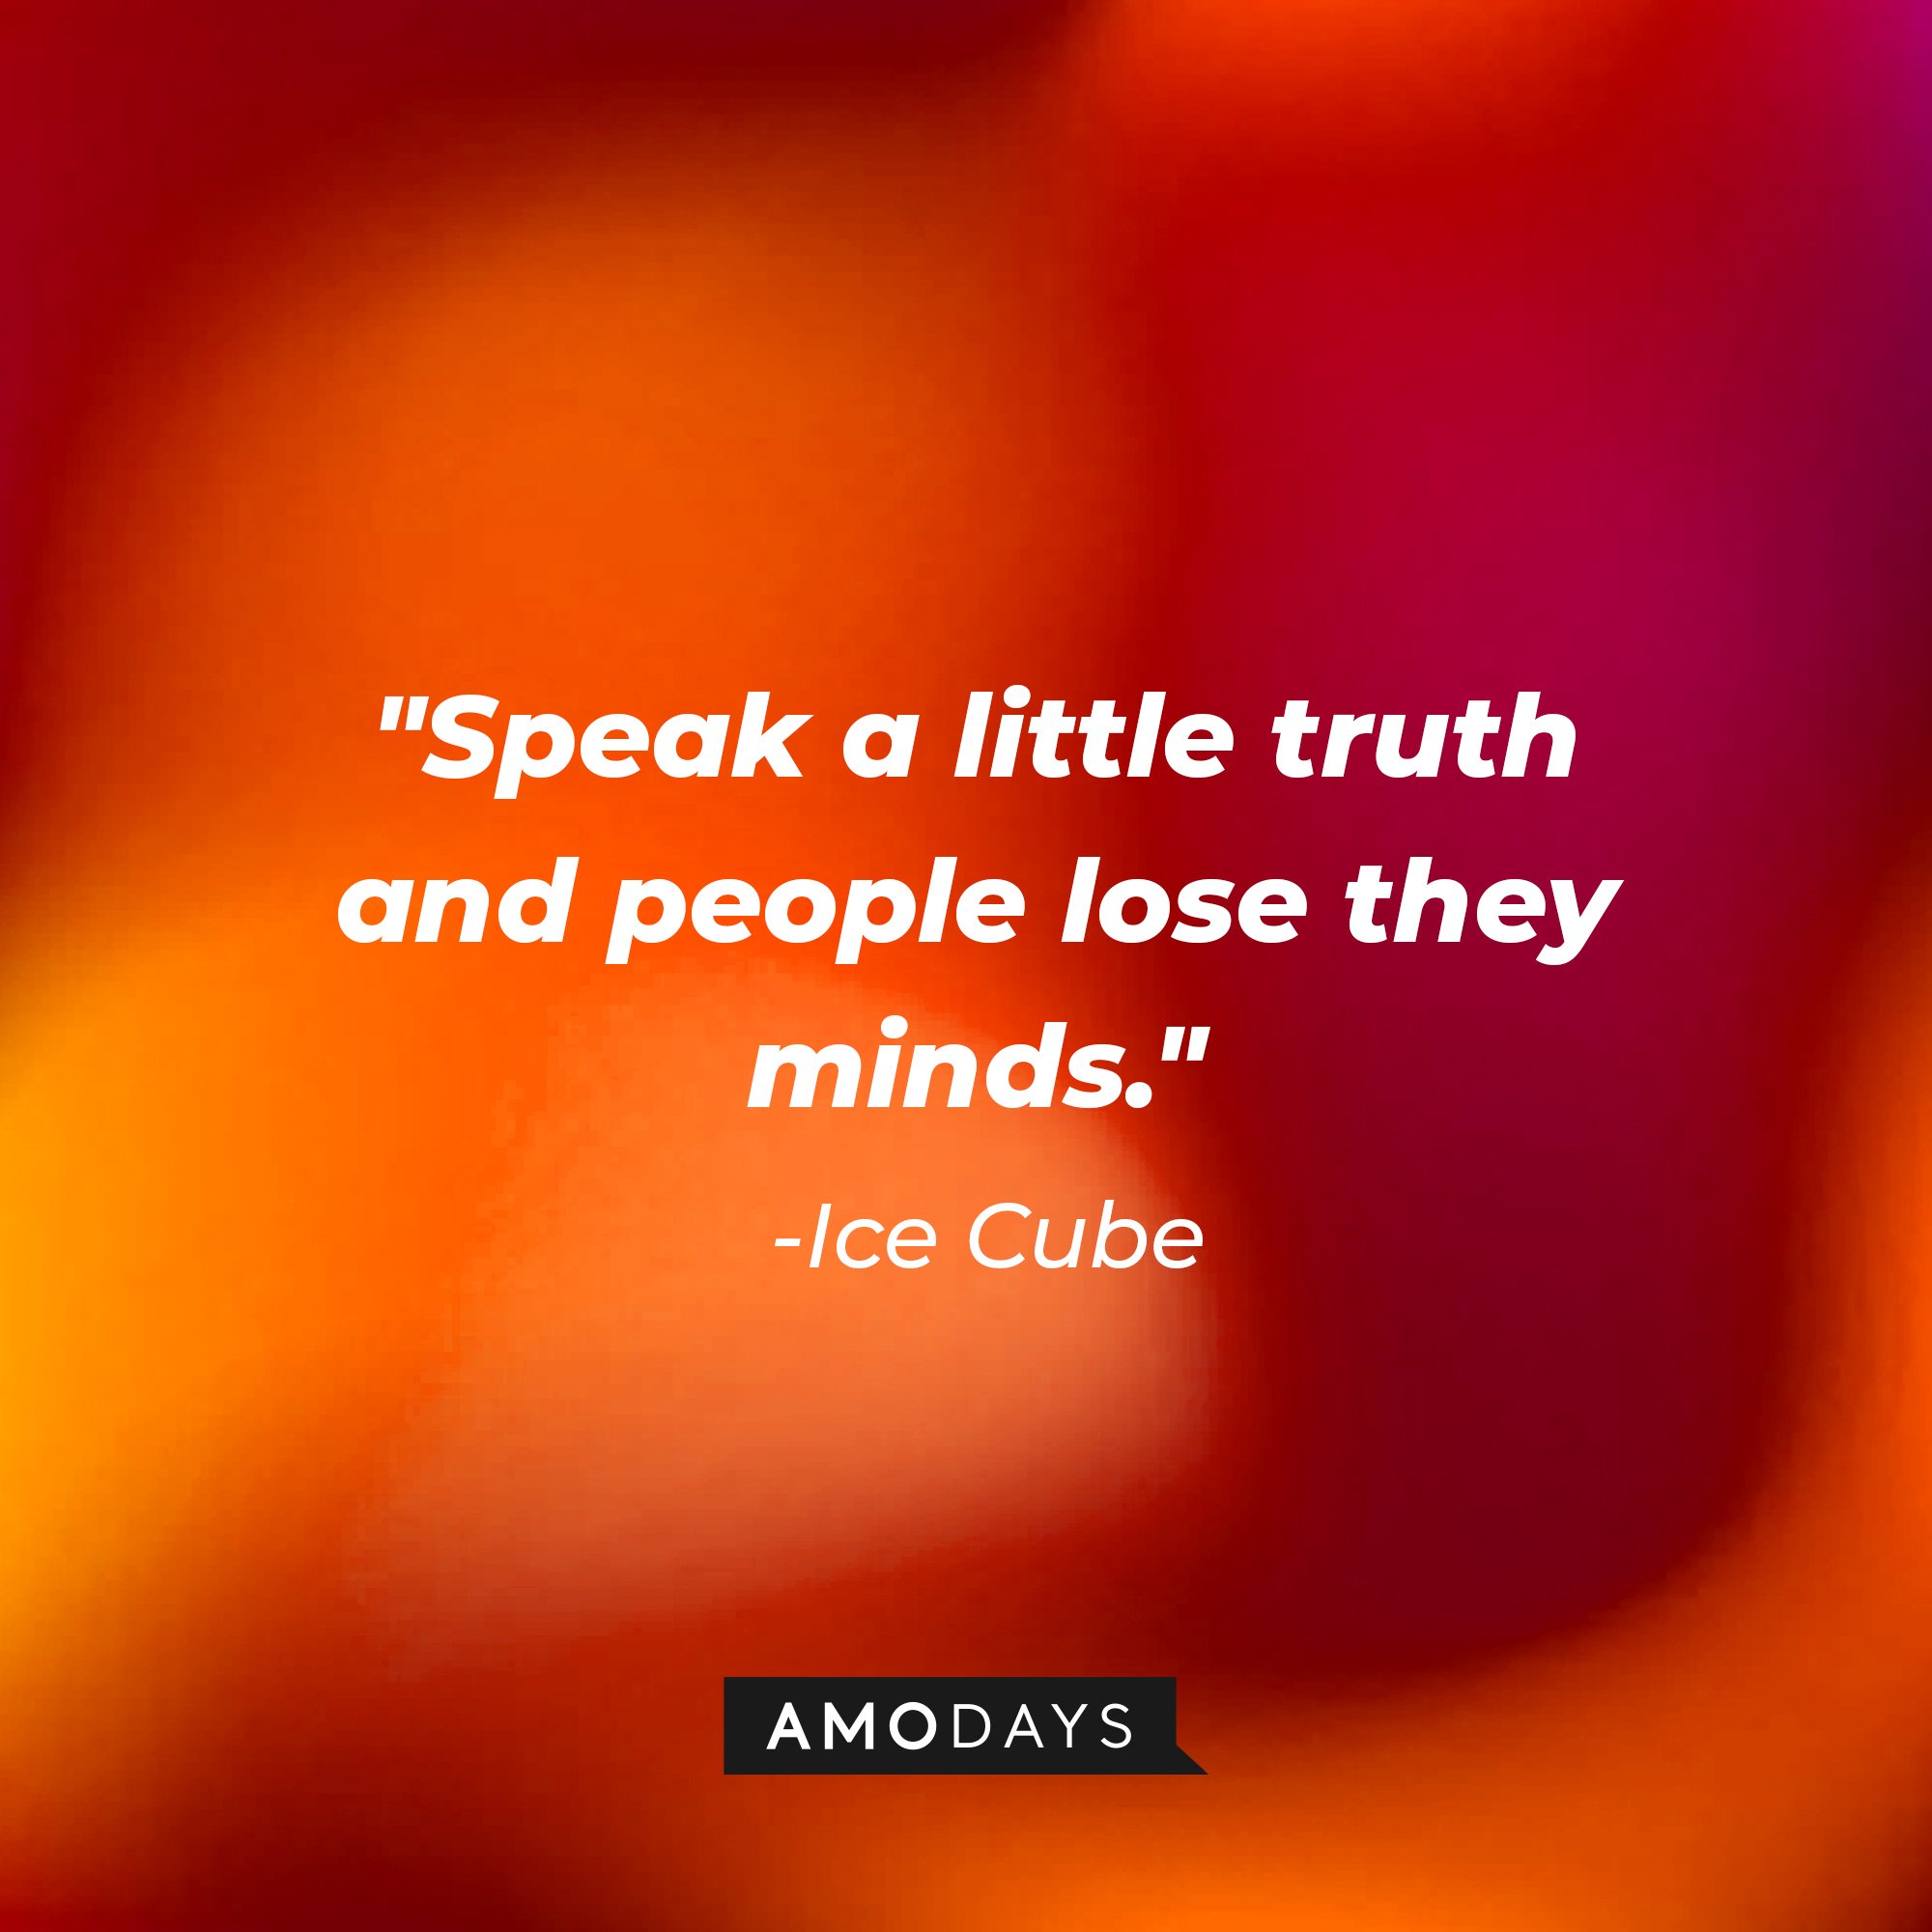 Ice Cube's quote: "Speak a little truth and people lose they minds." — Ice Cube | Image: AmoDays